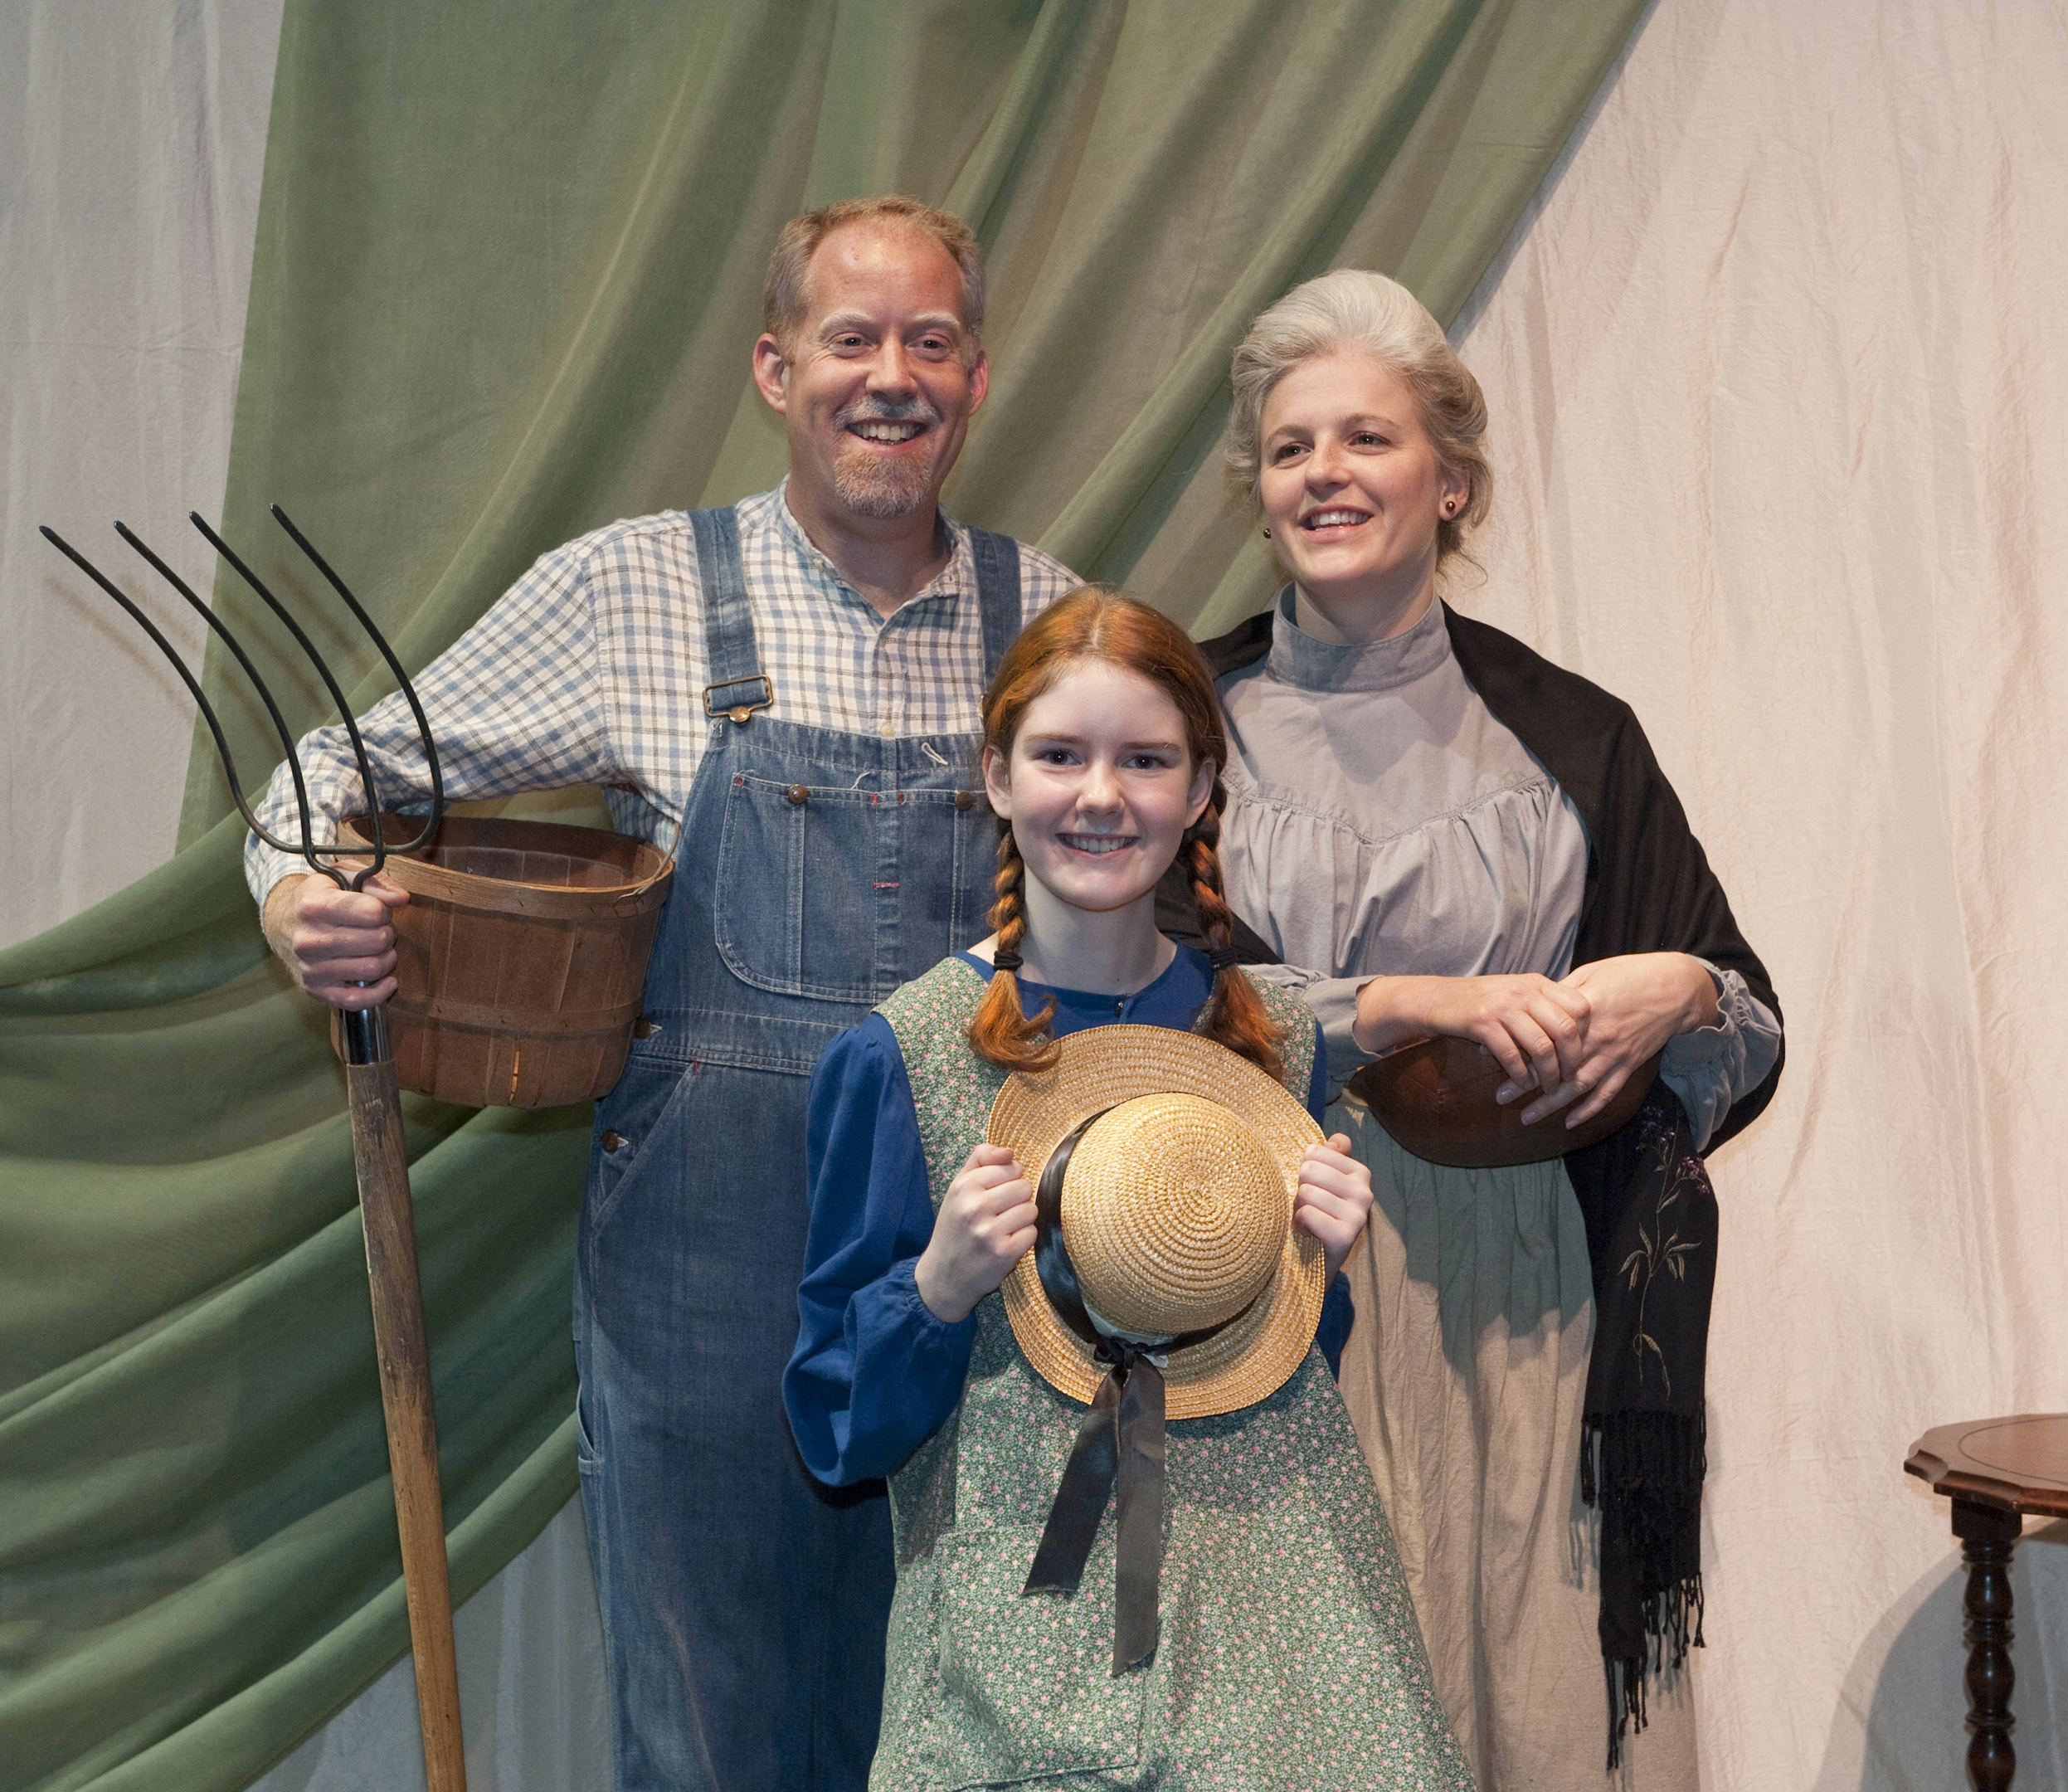 Dallas Children’s Theater presents ANNE OF GREEN GABLES for a limited two-week run and OPENING NIGHT TEA PARTY!